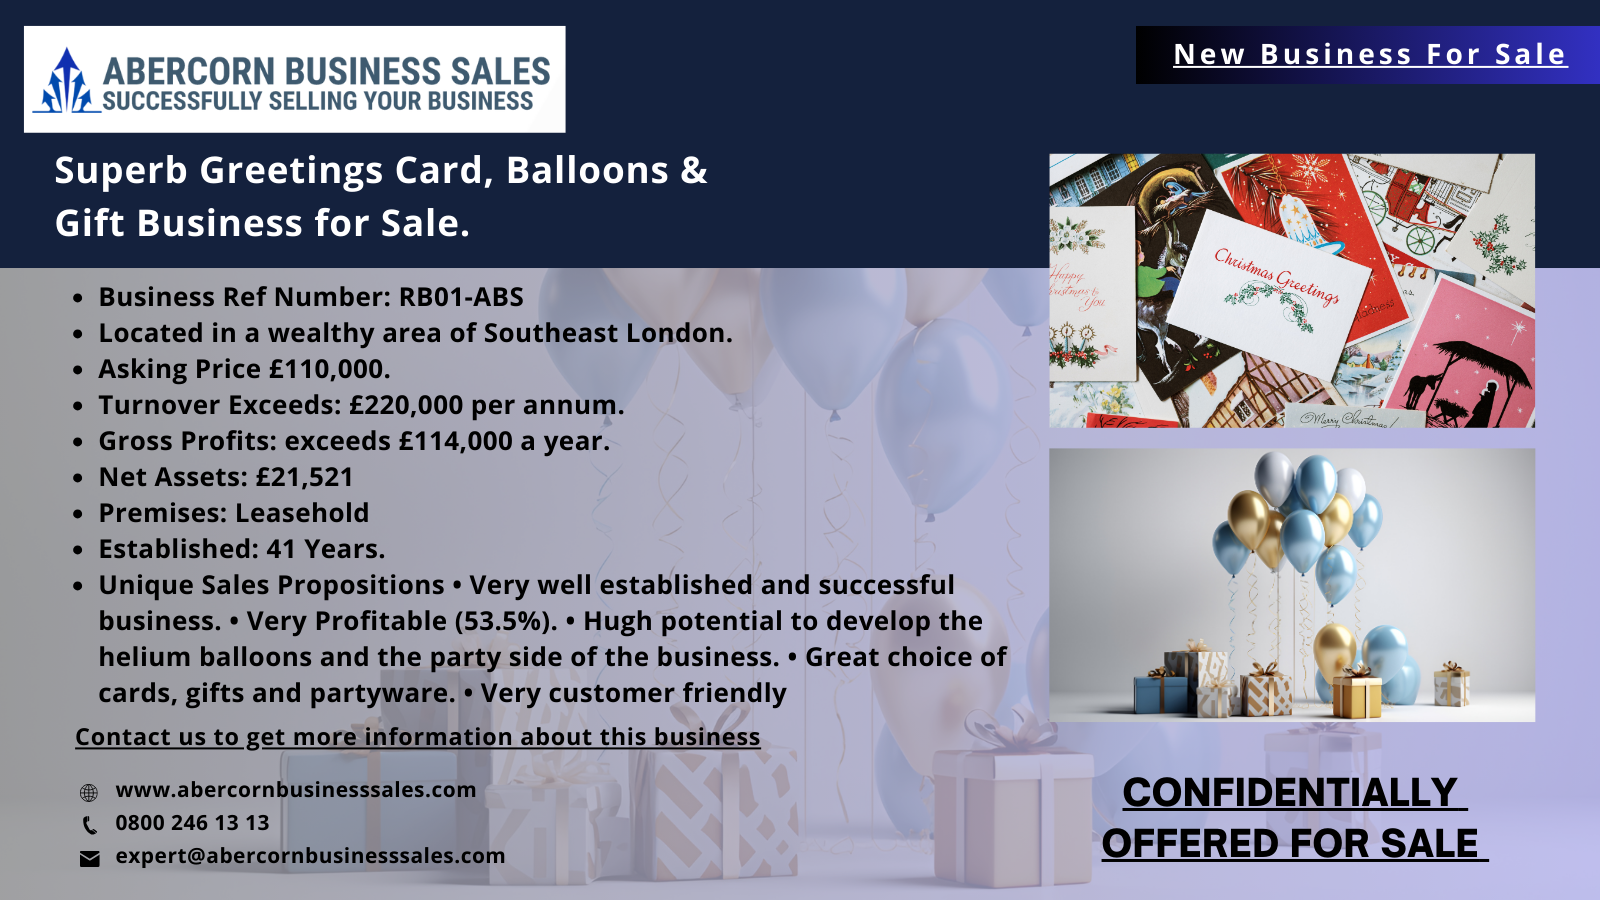 RB01-ABS - Superb Greetings Card,Balloons & Gift Business for Sale